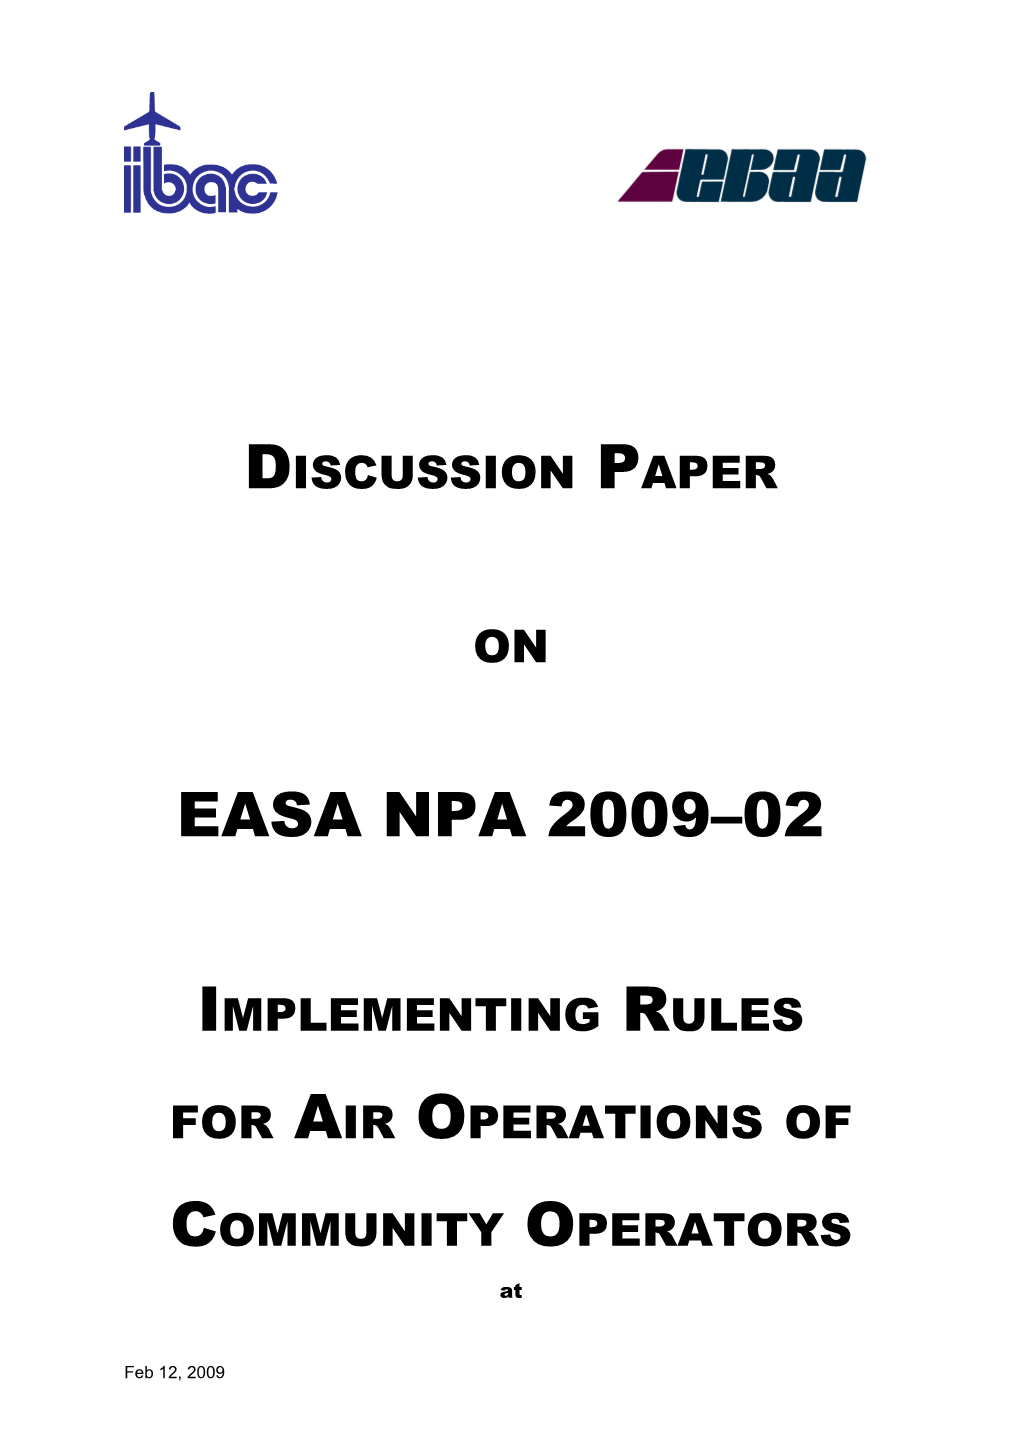 The Scope of the Implementing Rules Contained in NPA 2008 17A, 17B and 17C Are Specified